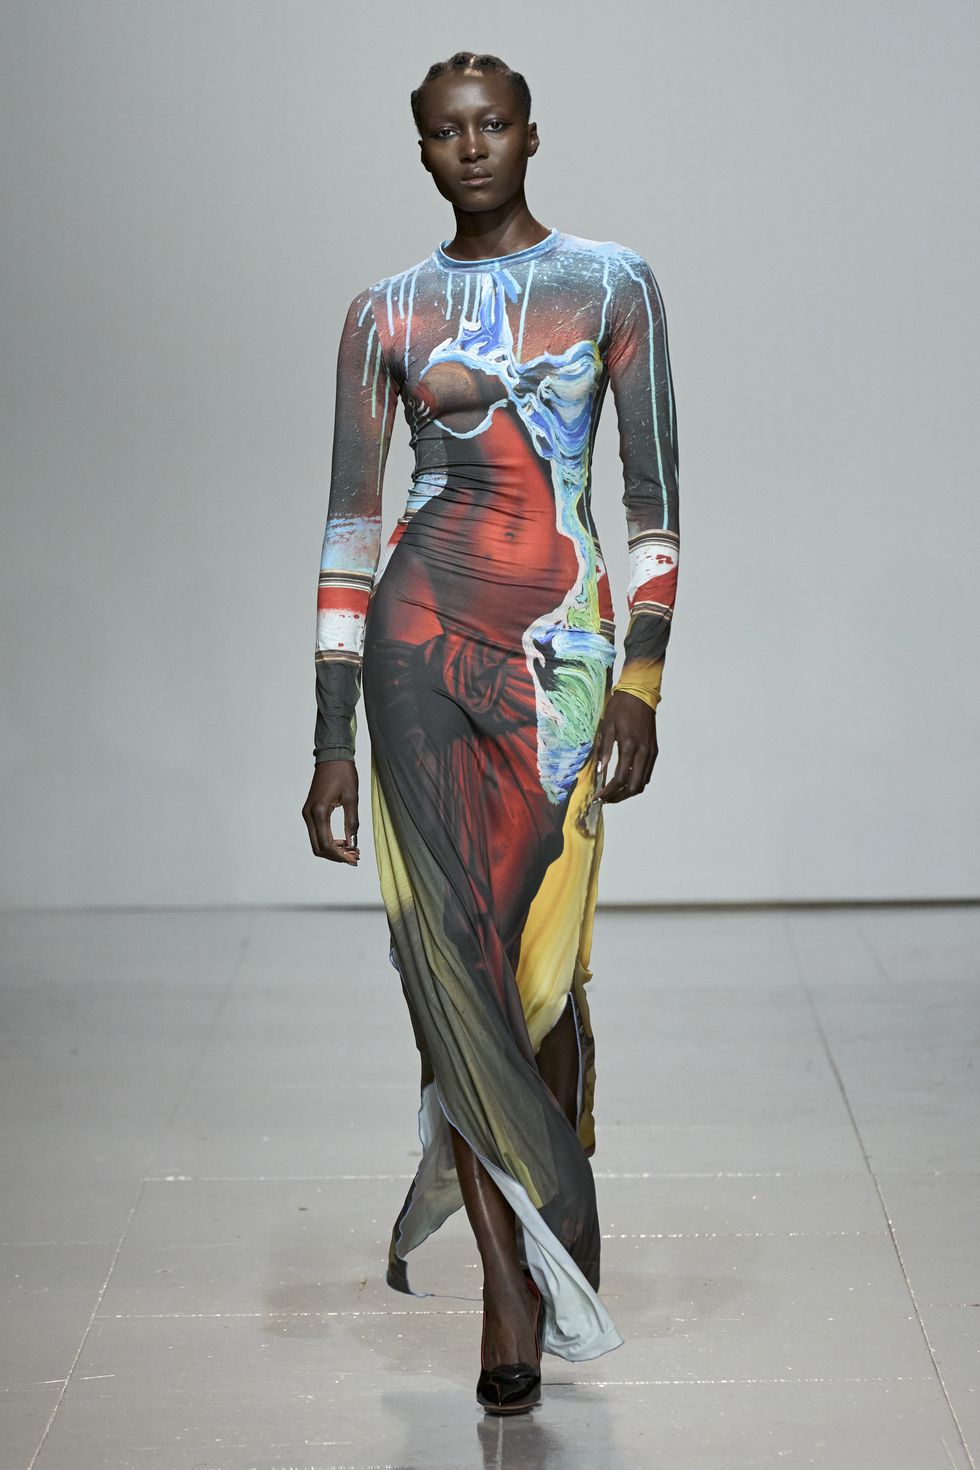 Feben On Her Intricate Tarot-Inspired AW23 Collection